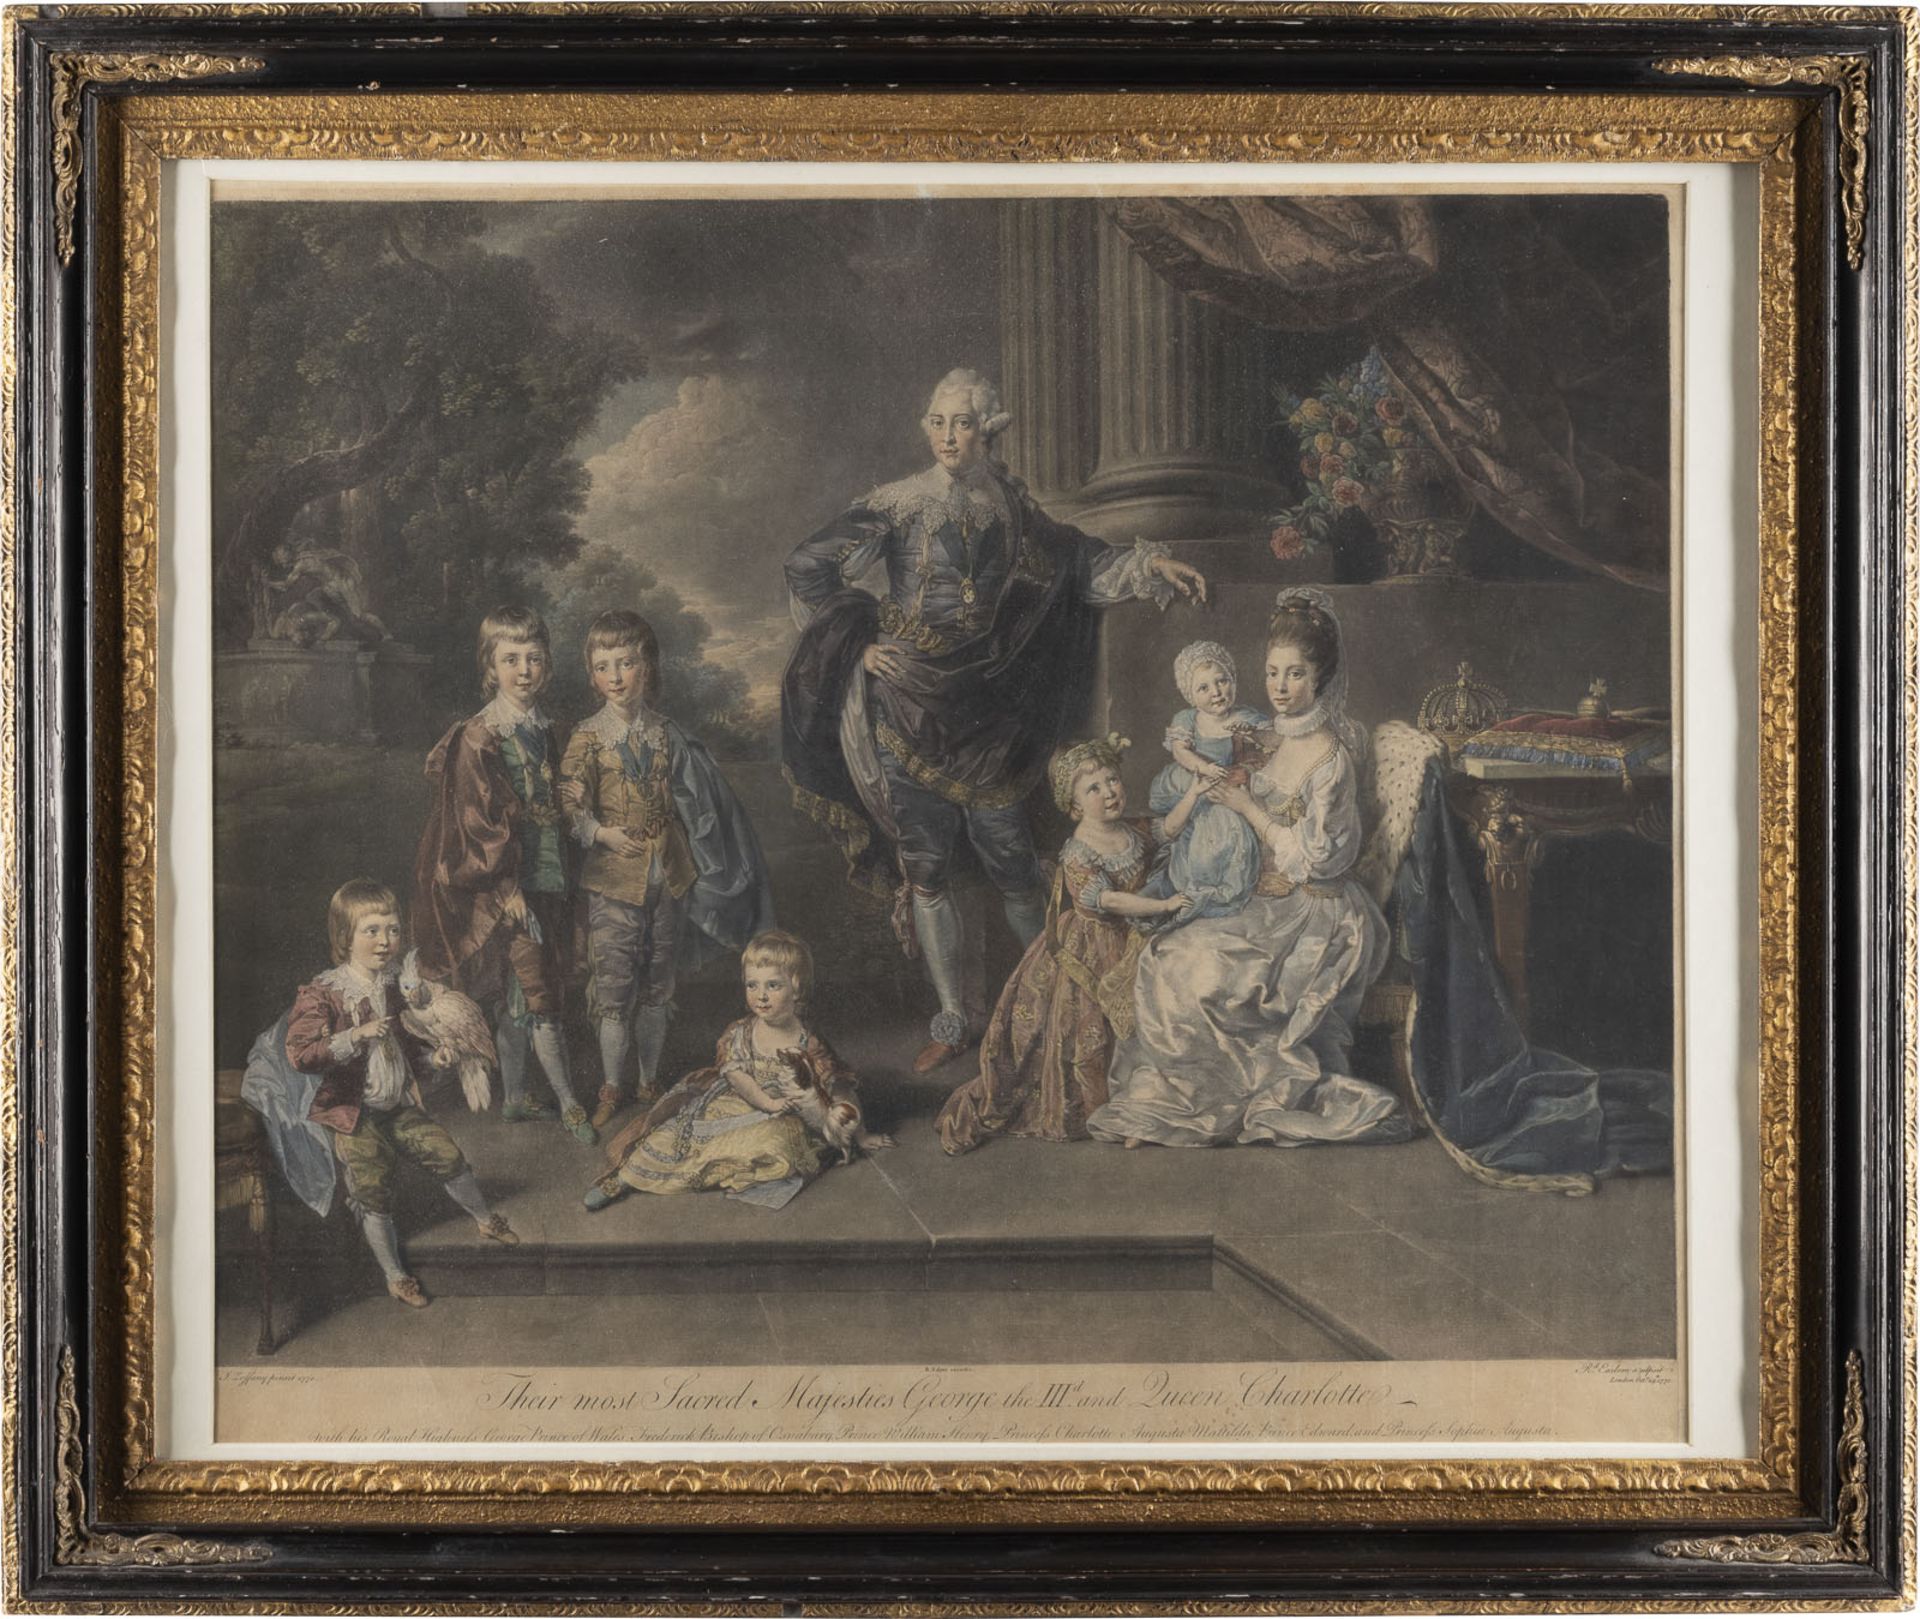 'THEIR MOST SACRED MAJESTIES GEORGE THE IIID AND QUEEN CHARLOTTE (...)' (NACH JOHANN JOSEPH ZOFFANY  - Image 2 of 2